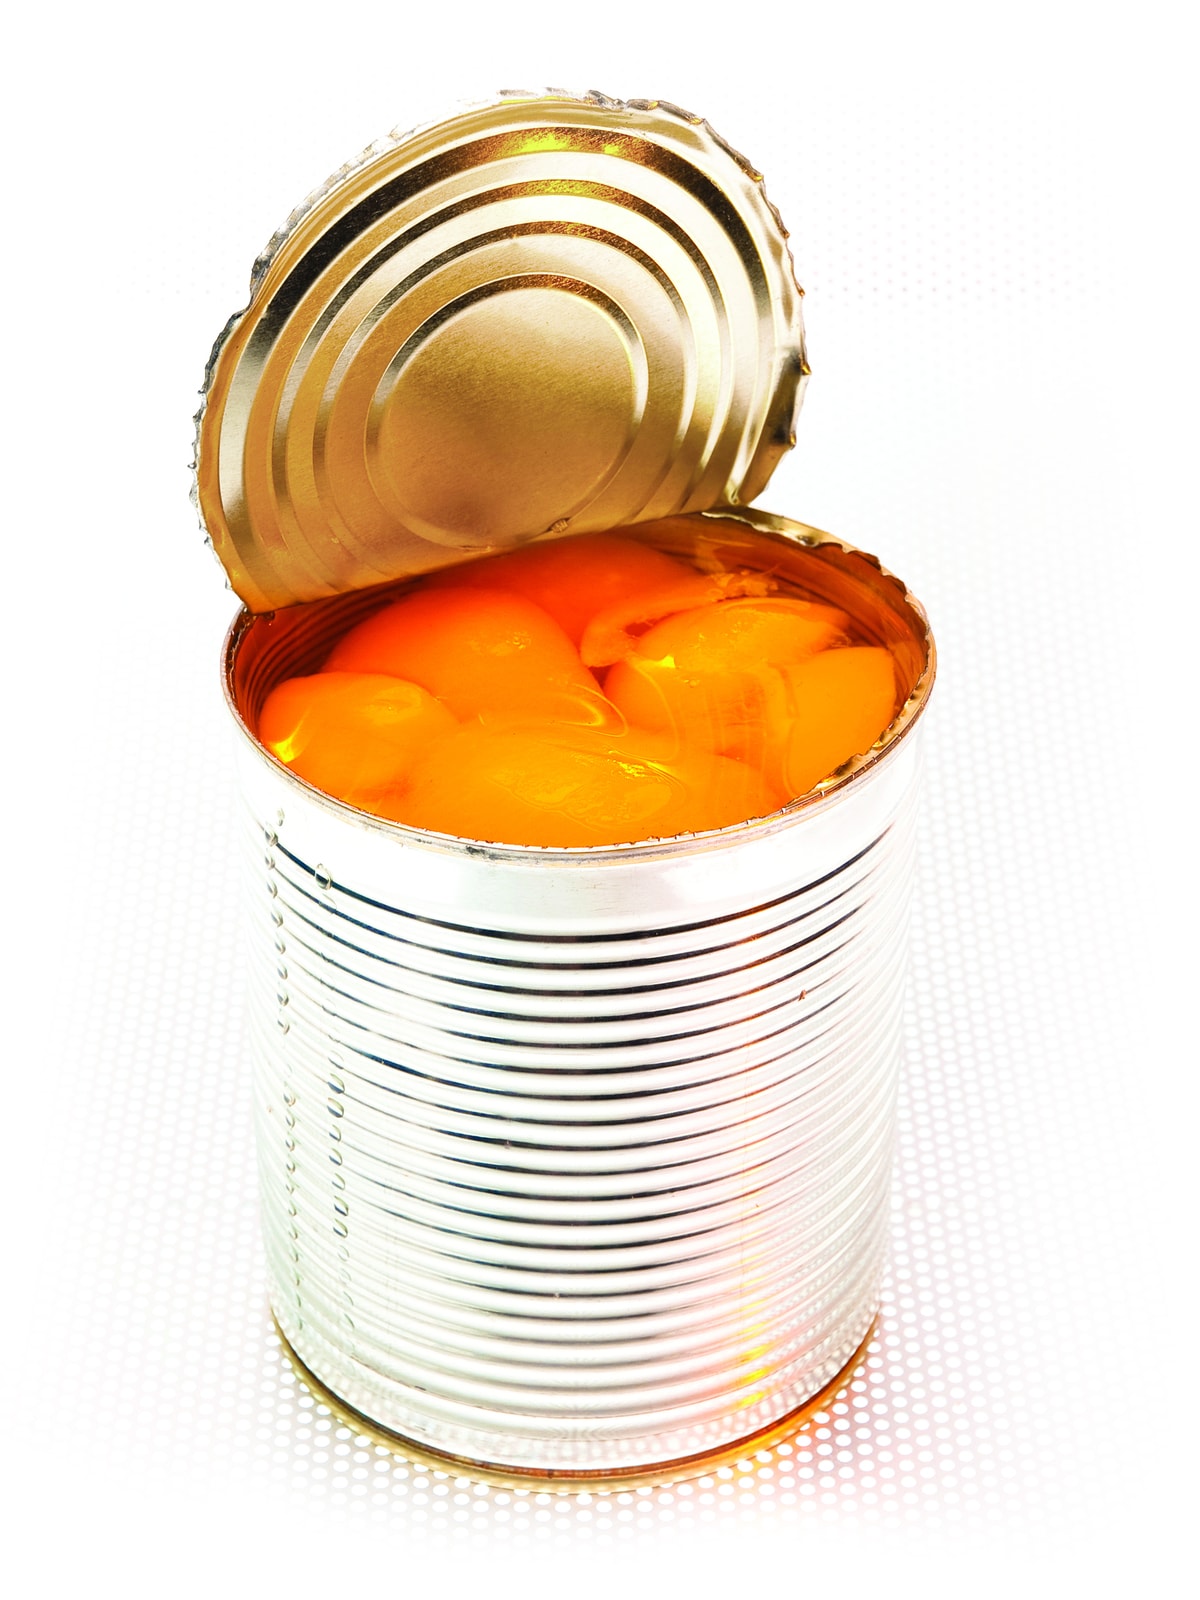 How do they make canned food? - Healthy Food Guide